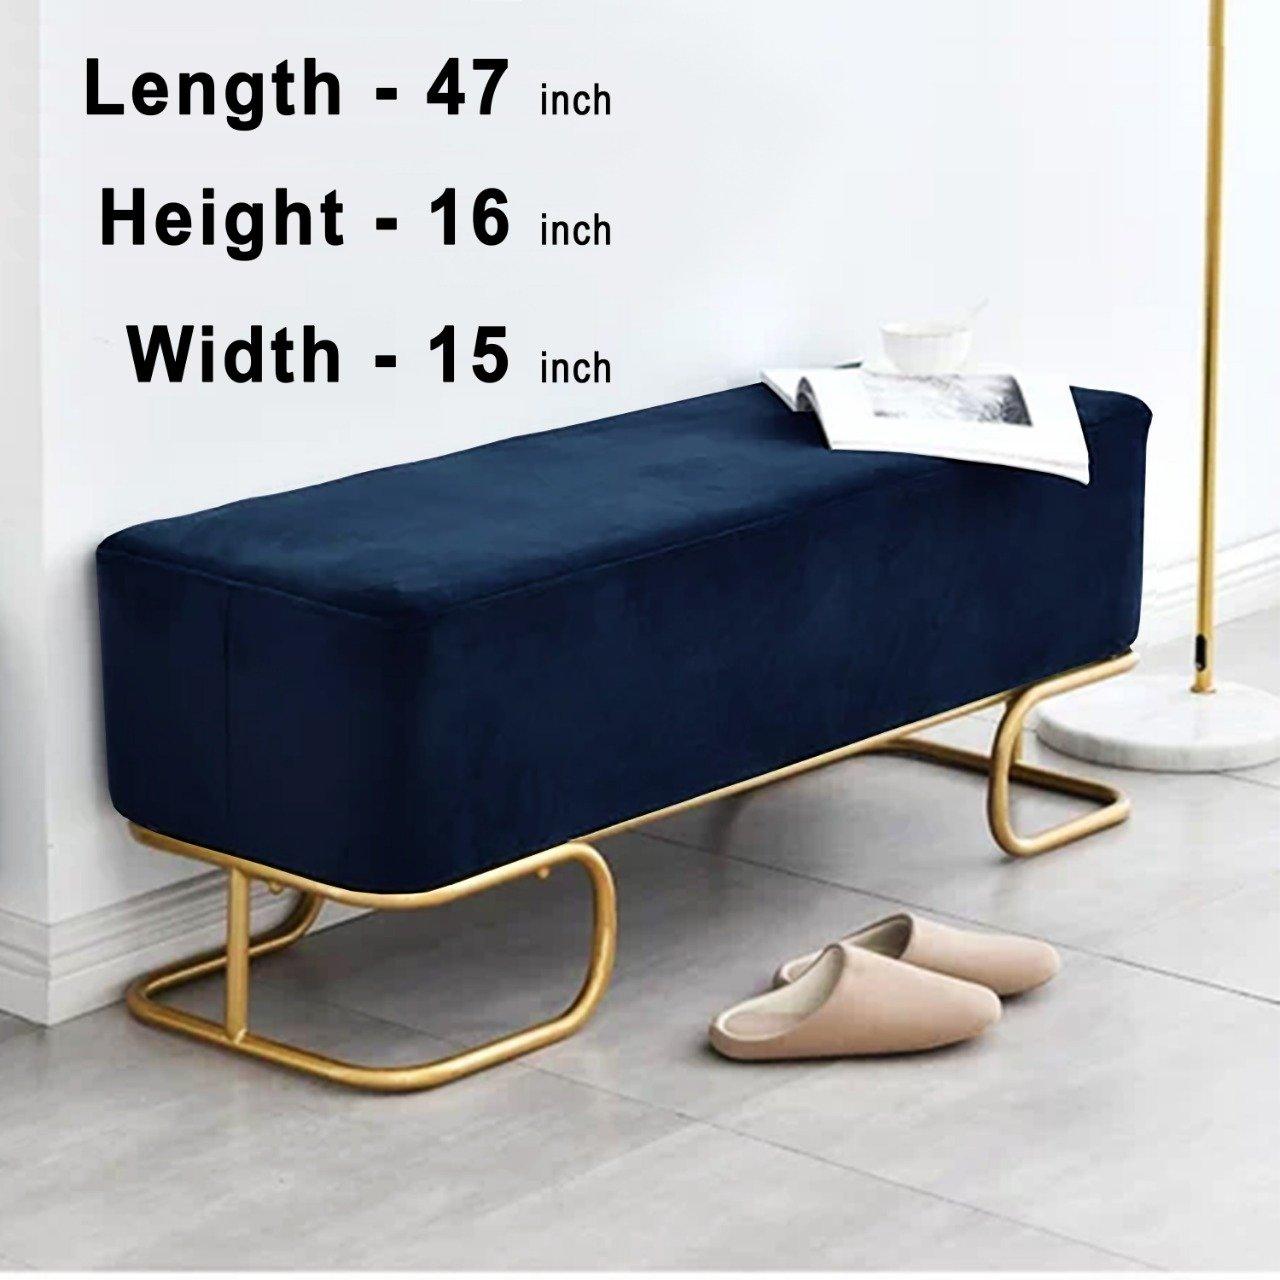 Luxury Wooden stool 3 Seater With Steel Stand -331 - 92Bedding